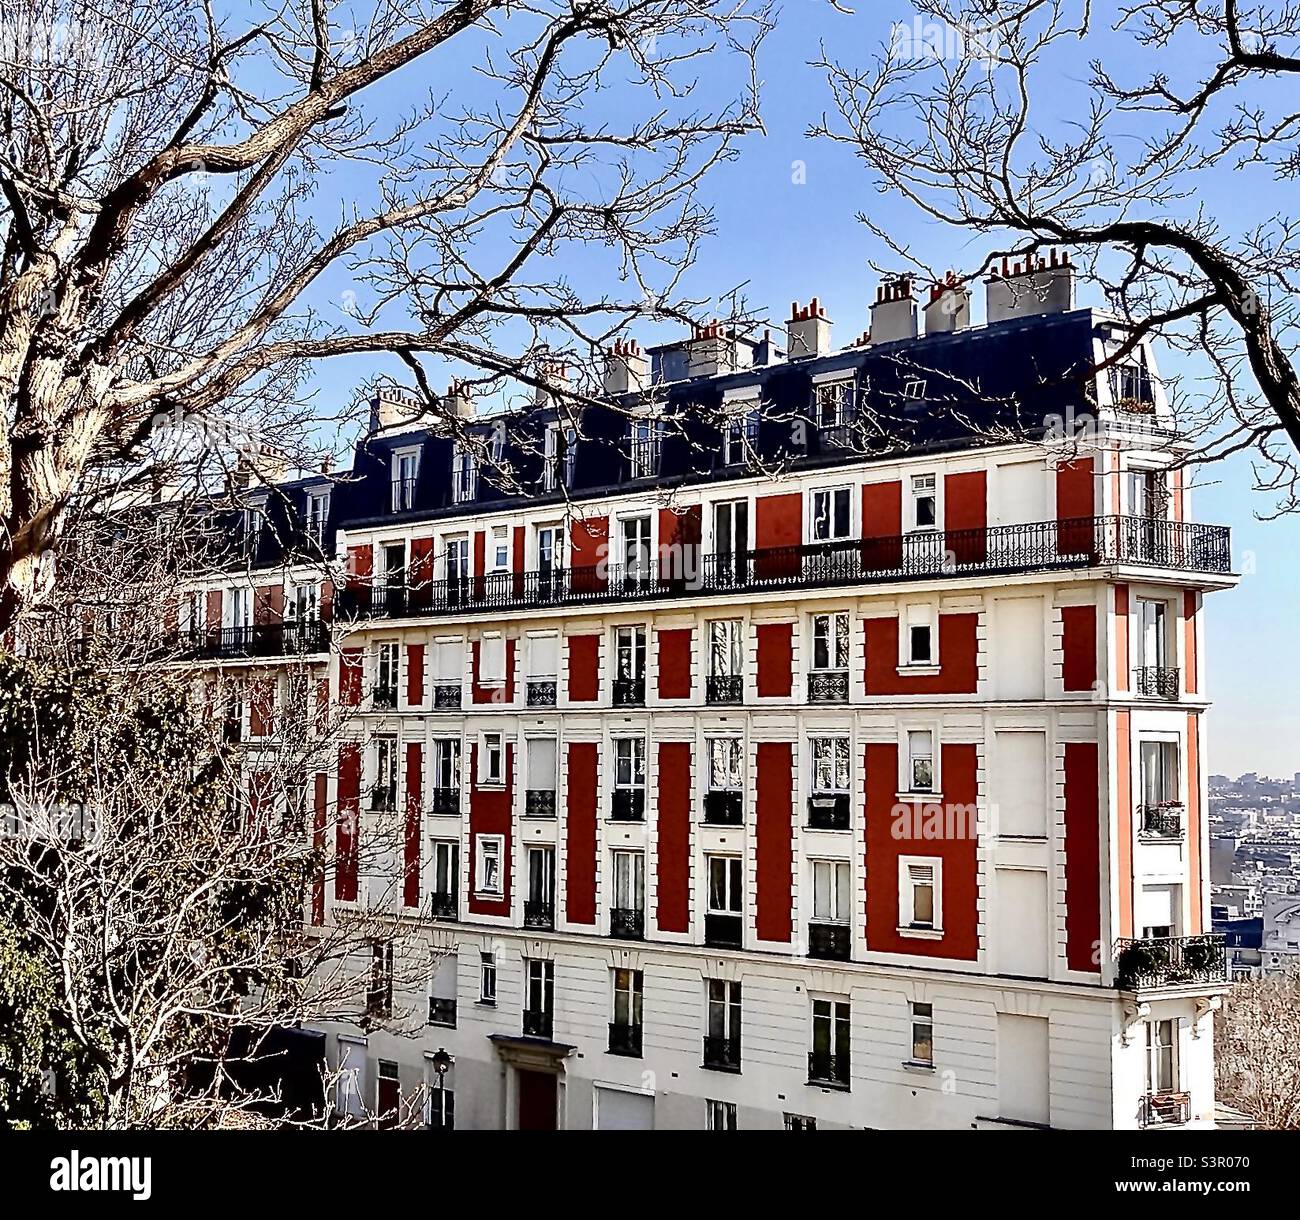 Elegant apartments high on Rue Lamarck at the eastern side of the Sacre Coeur Basilica in Paris. Nearby are extensive views over Paris. Below, at street level are numerous restaurants. Stock Photo